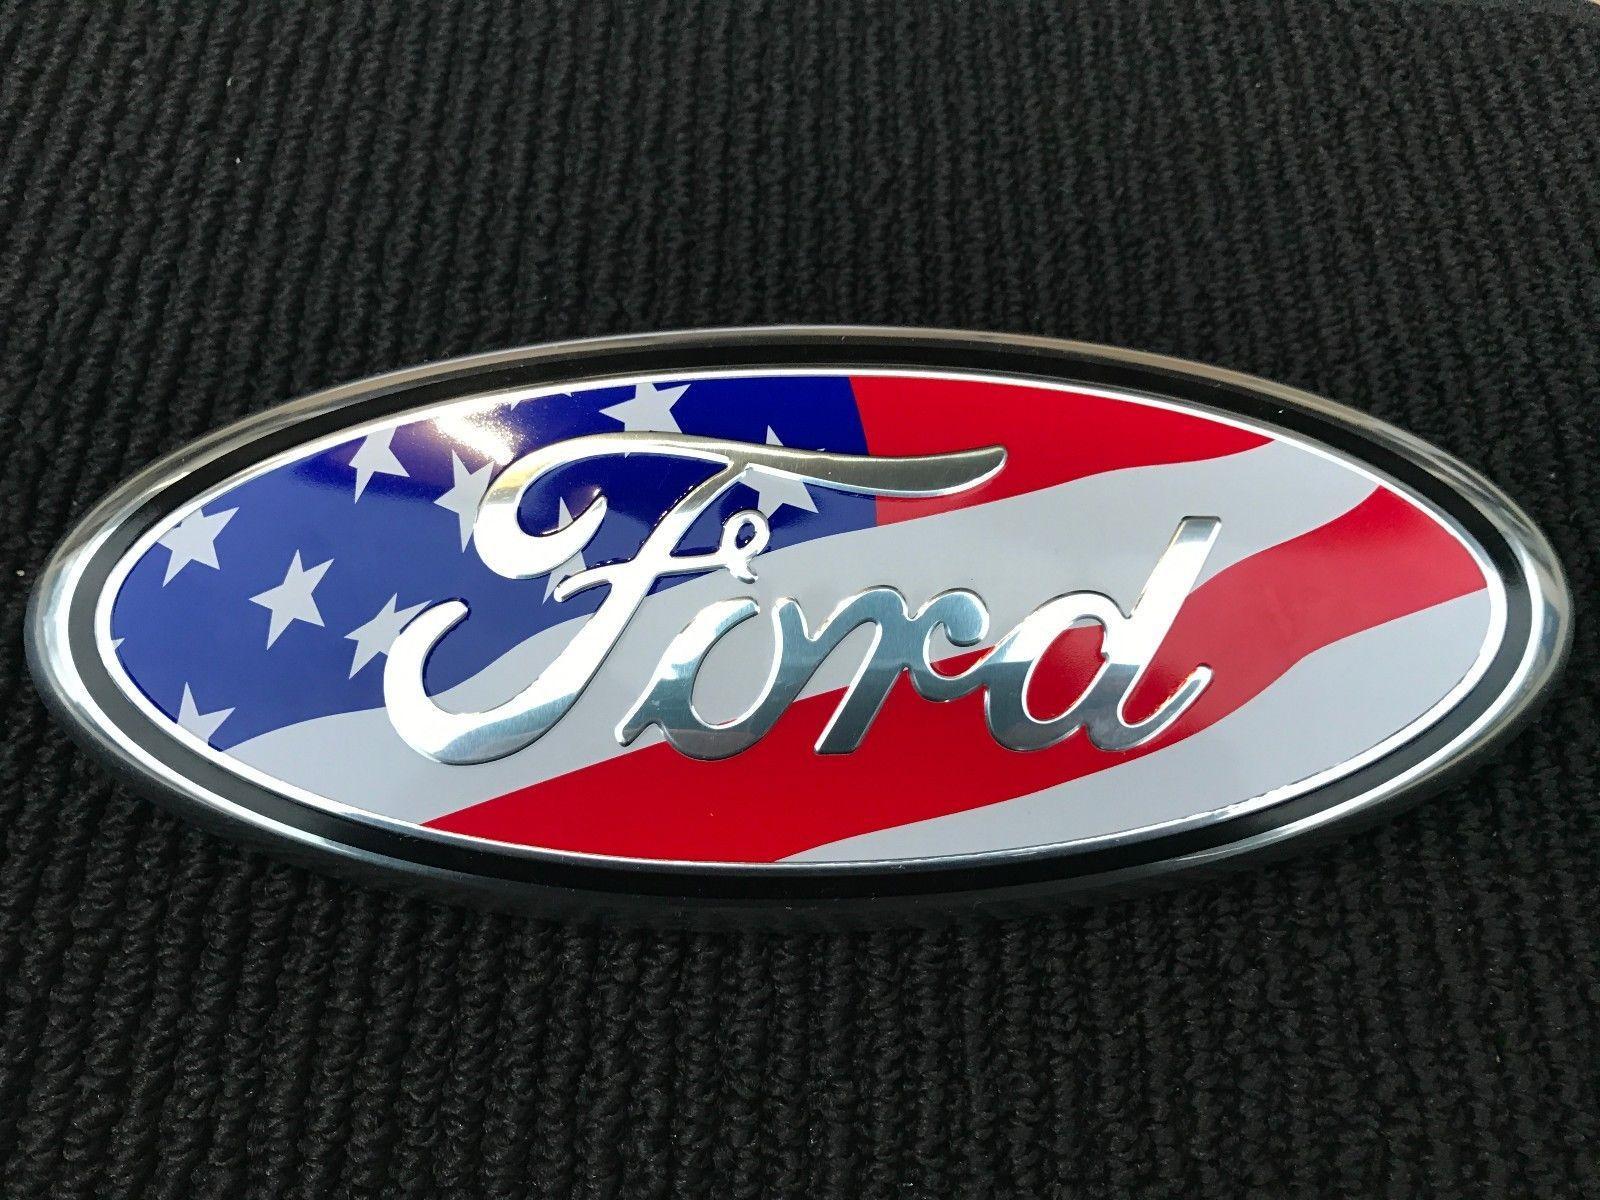 2014 Ford Logo - NEW 2004 2014 FORD F 150 USA FLAG FRONT GRILLE OR REAR TAILGATE